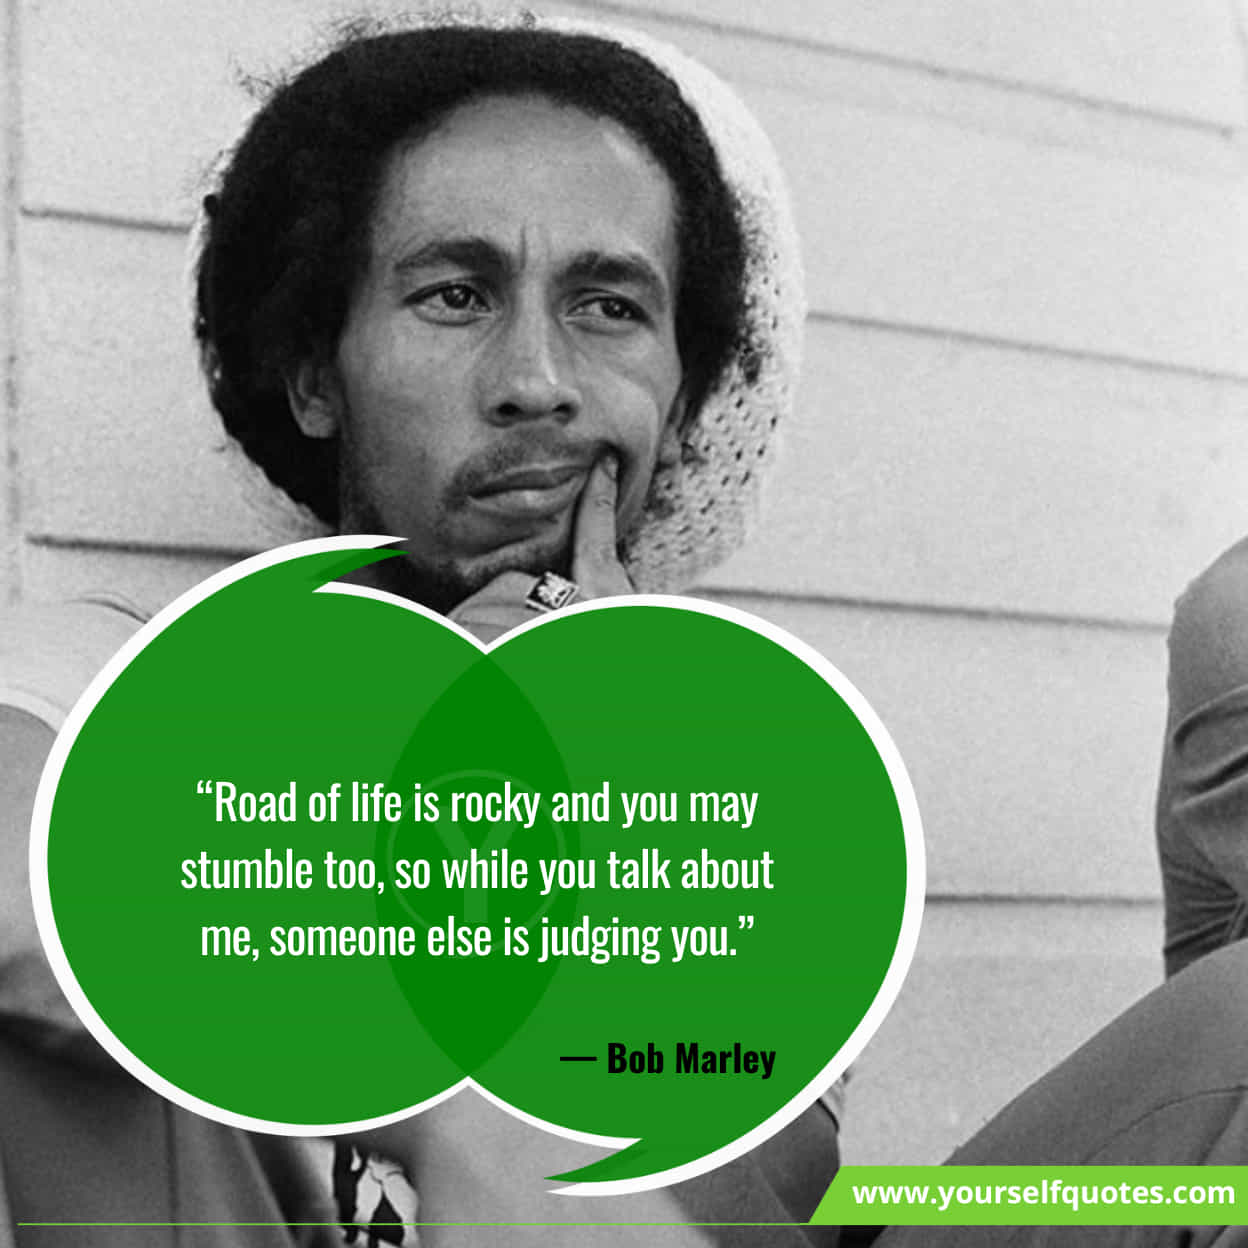 Bob Marley Quotes On Love